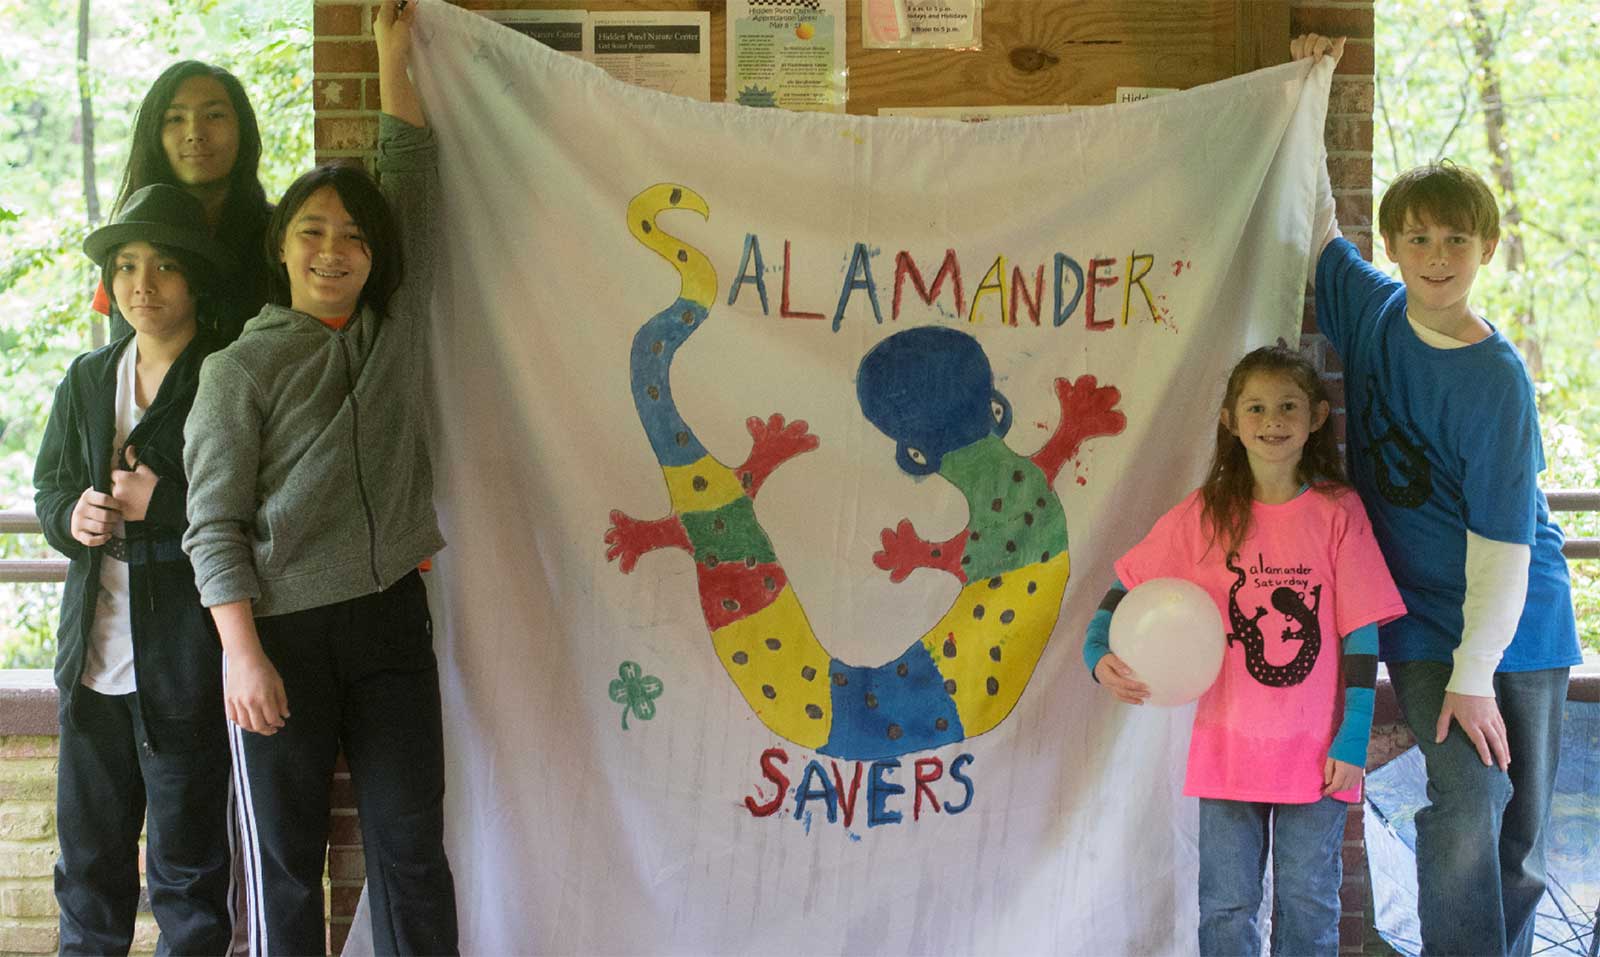 A picture of several children holding up a sheet that says "salamander savers!" this is part of the youth conservation initiative to raise awareness about salamanders and their plights